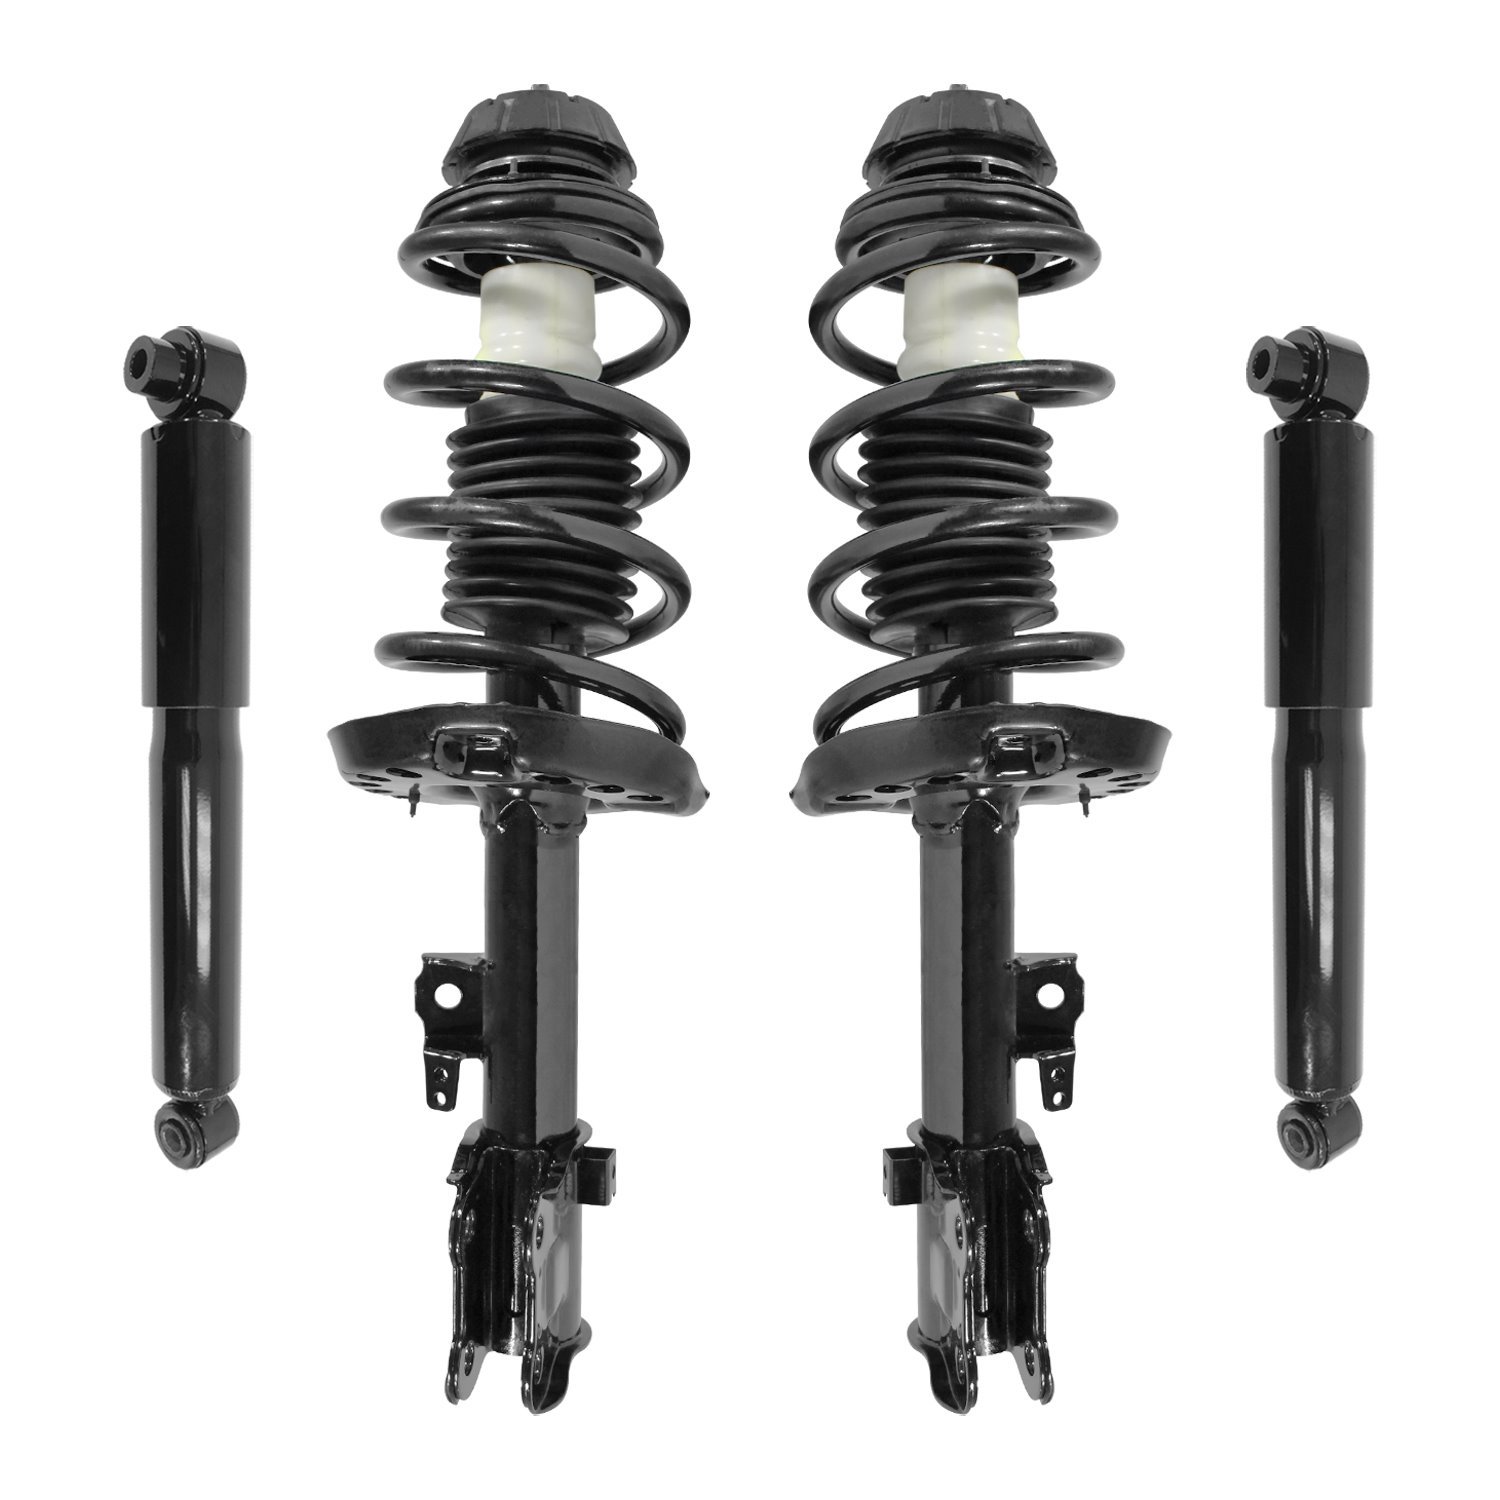 4-11933-259080-001 Front & Rear Suspension Strut & Coil Spring Assembly Fits Select Kia Soul